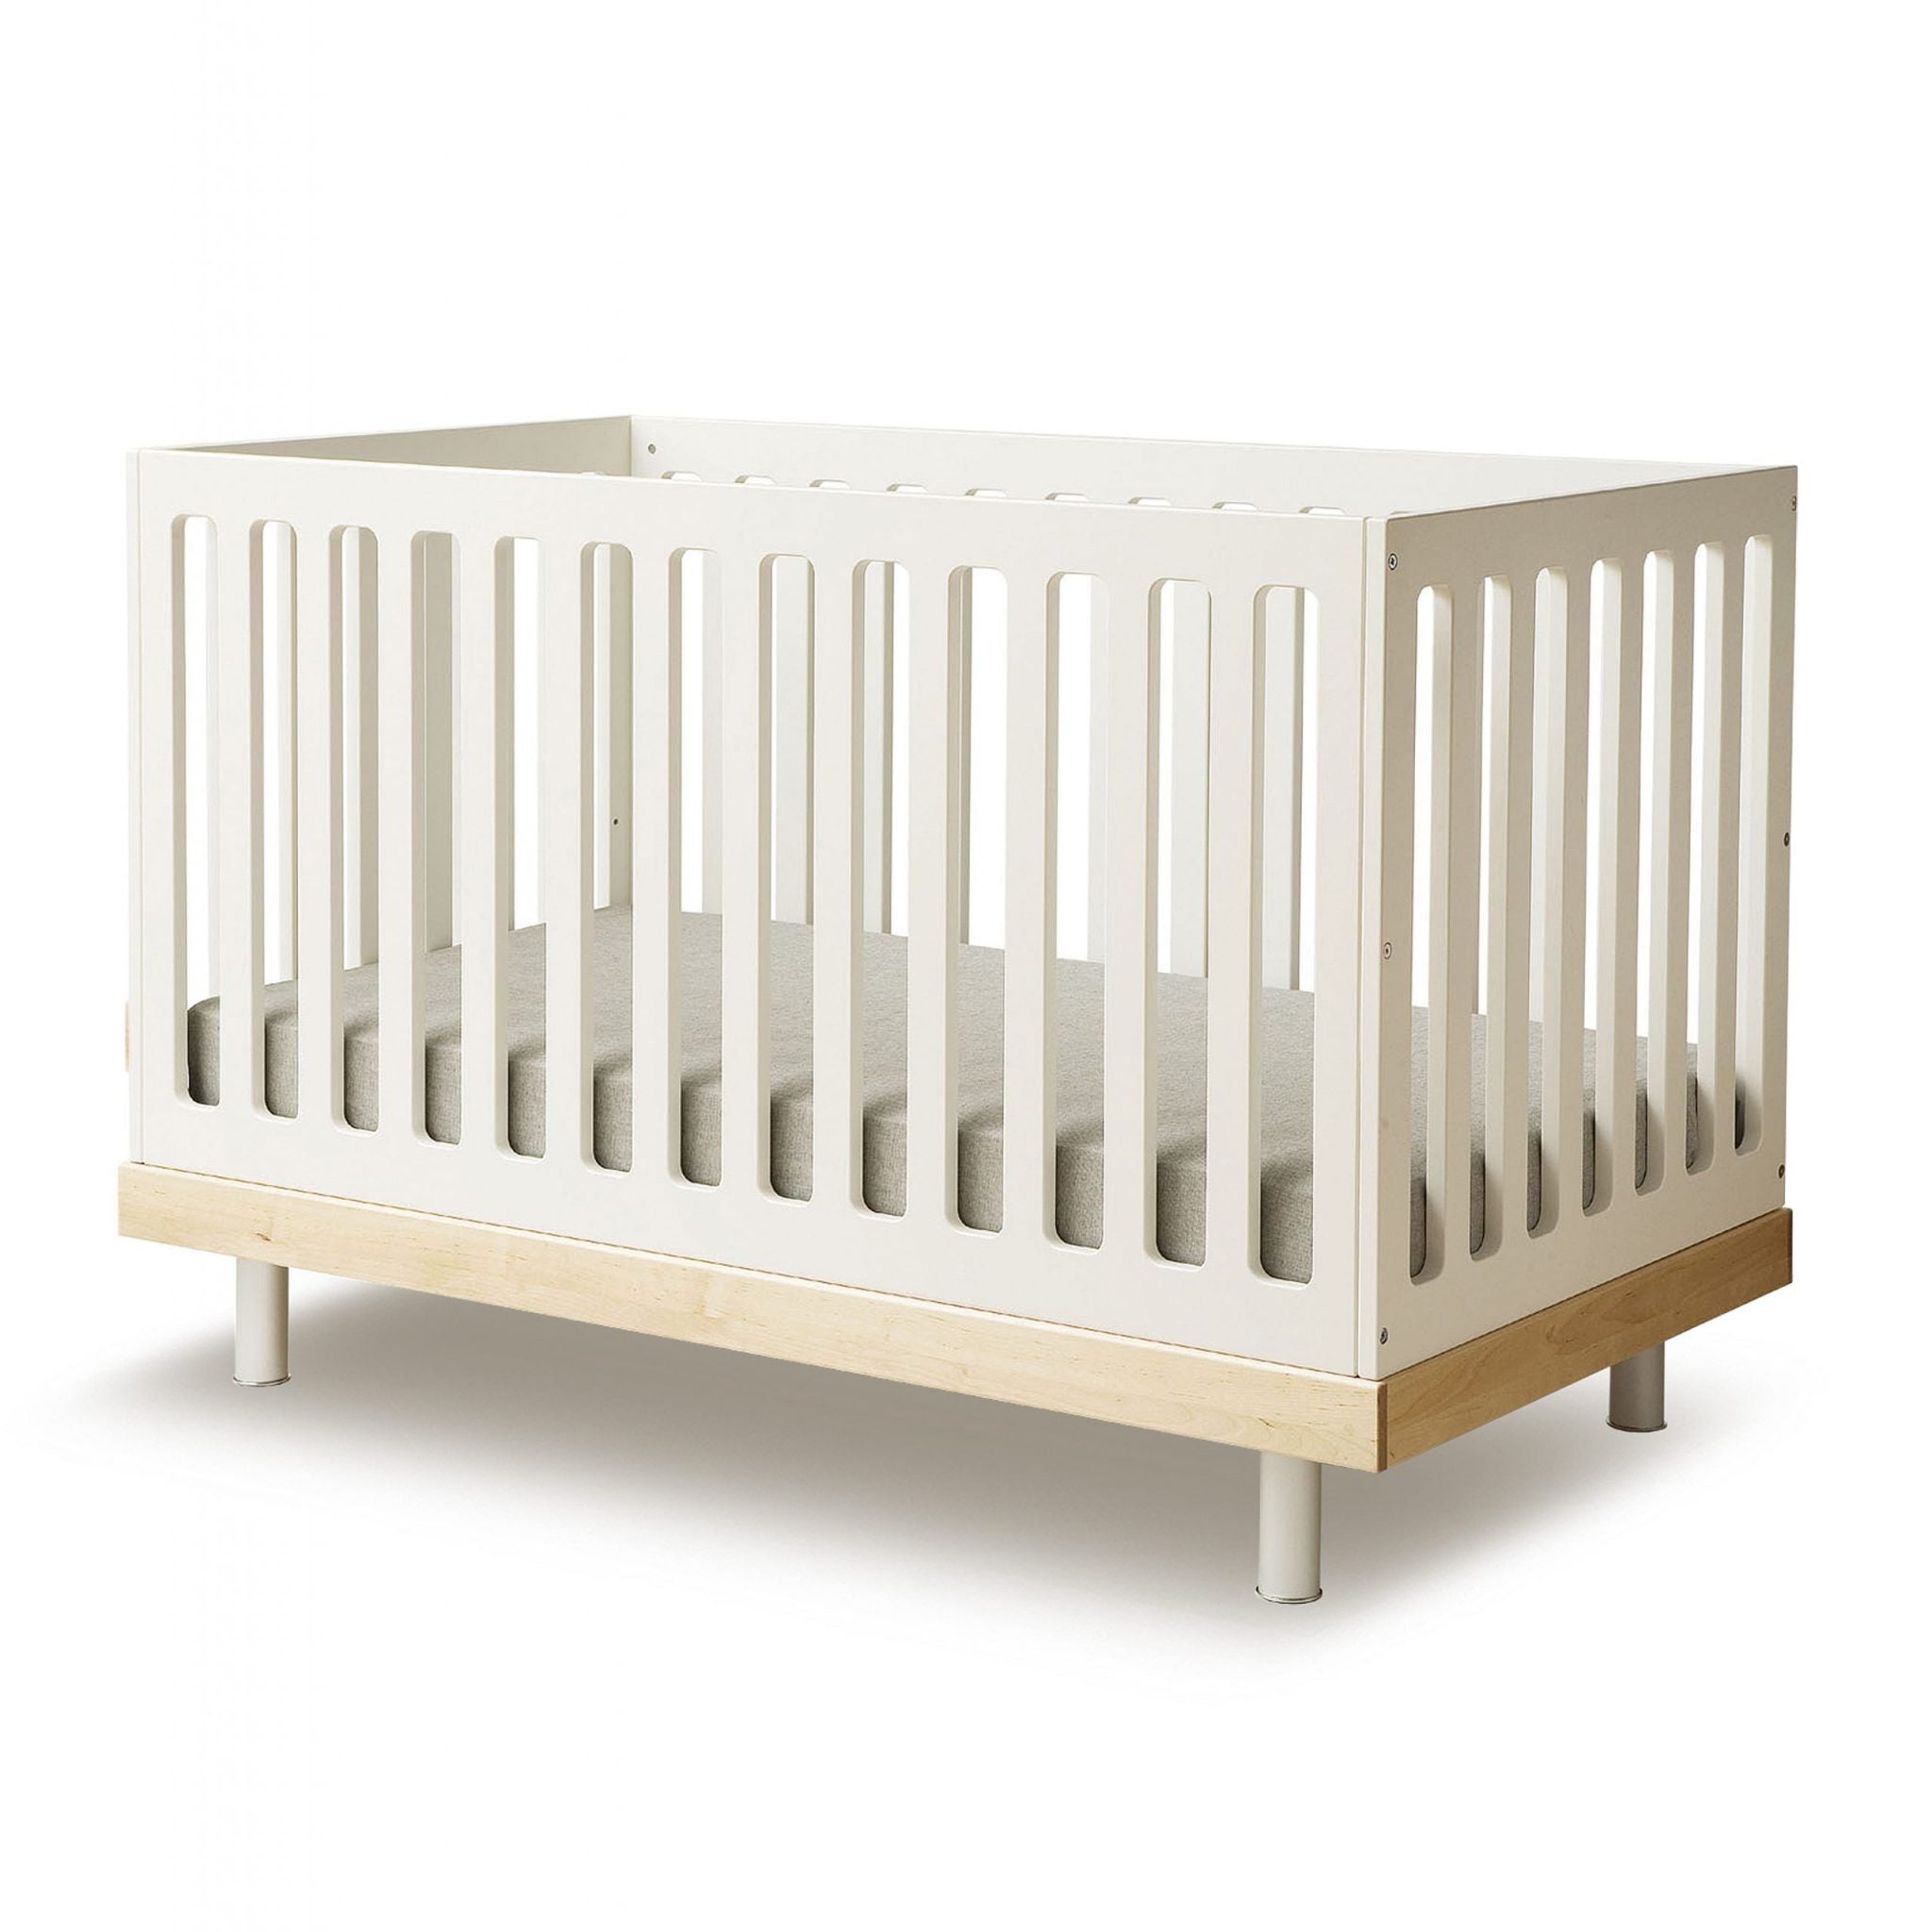 Oeuf Classic Cot Bed in White & Birch